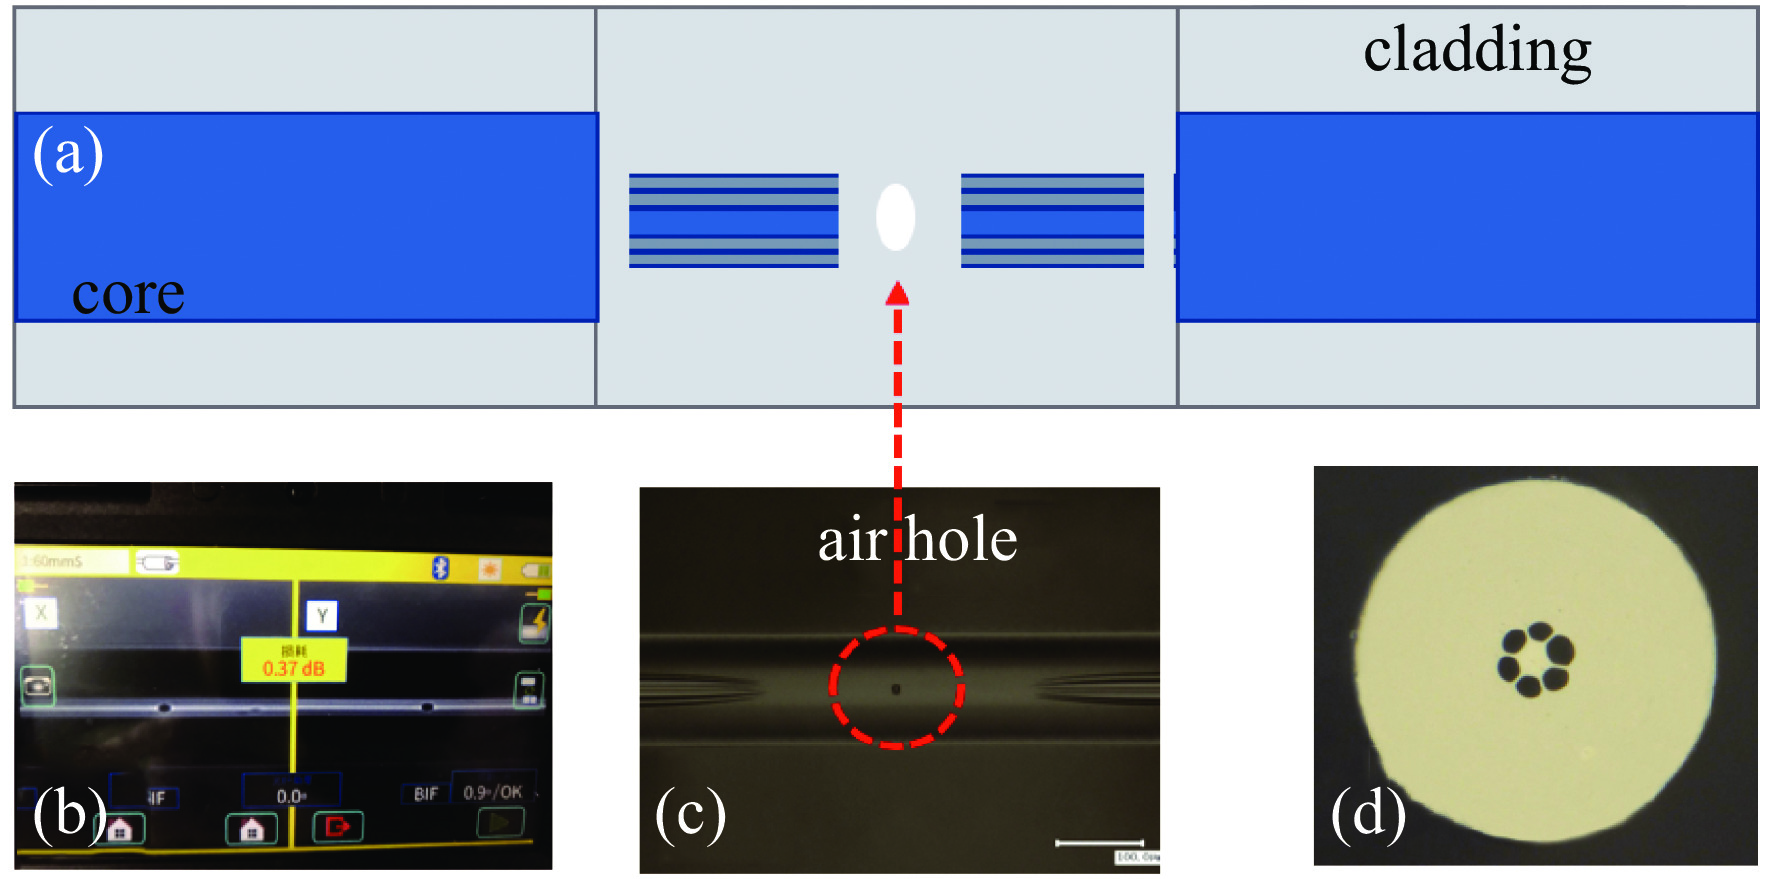 (a) Schematic diagram of the sensing structure, (b) splicing diagram of air holes introduced between PCFs, (c) optical microscope image of the collapsed area and air holes between two PCFs, (d) surface microscopic image of the grapefruit-shaped PCF end